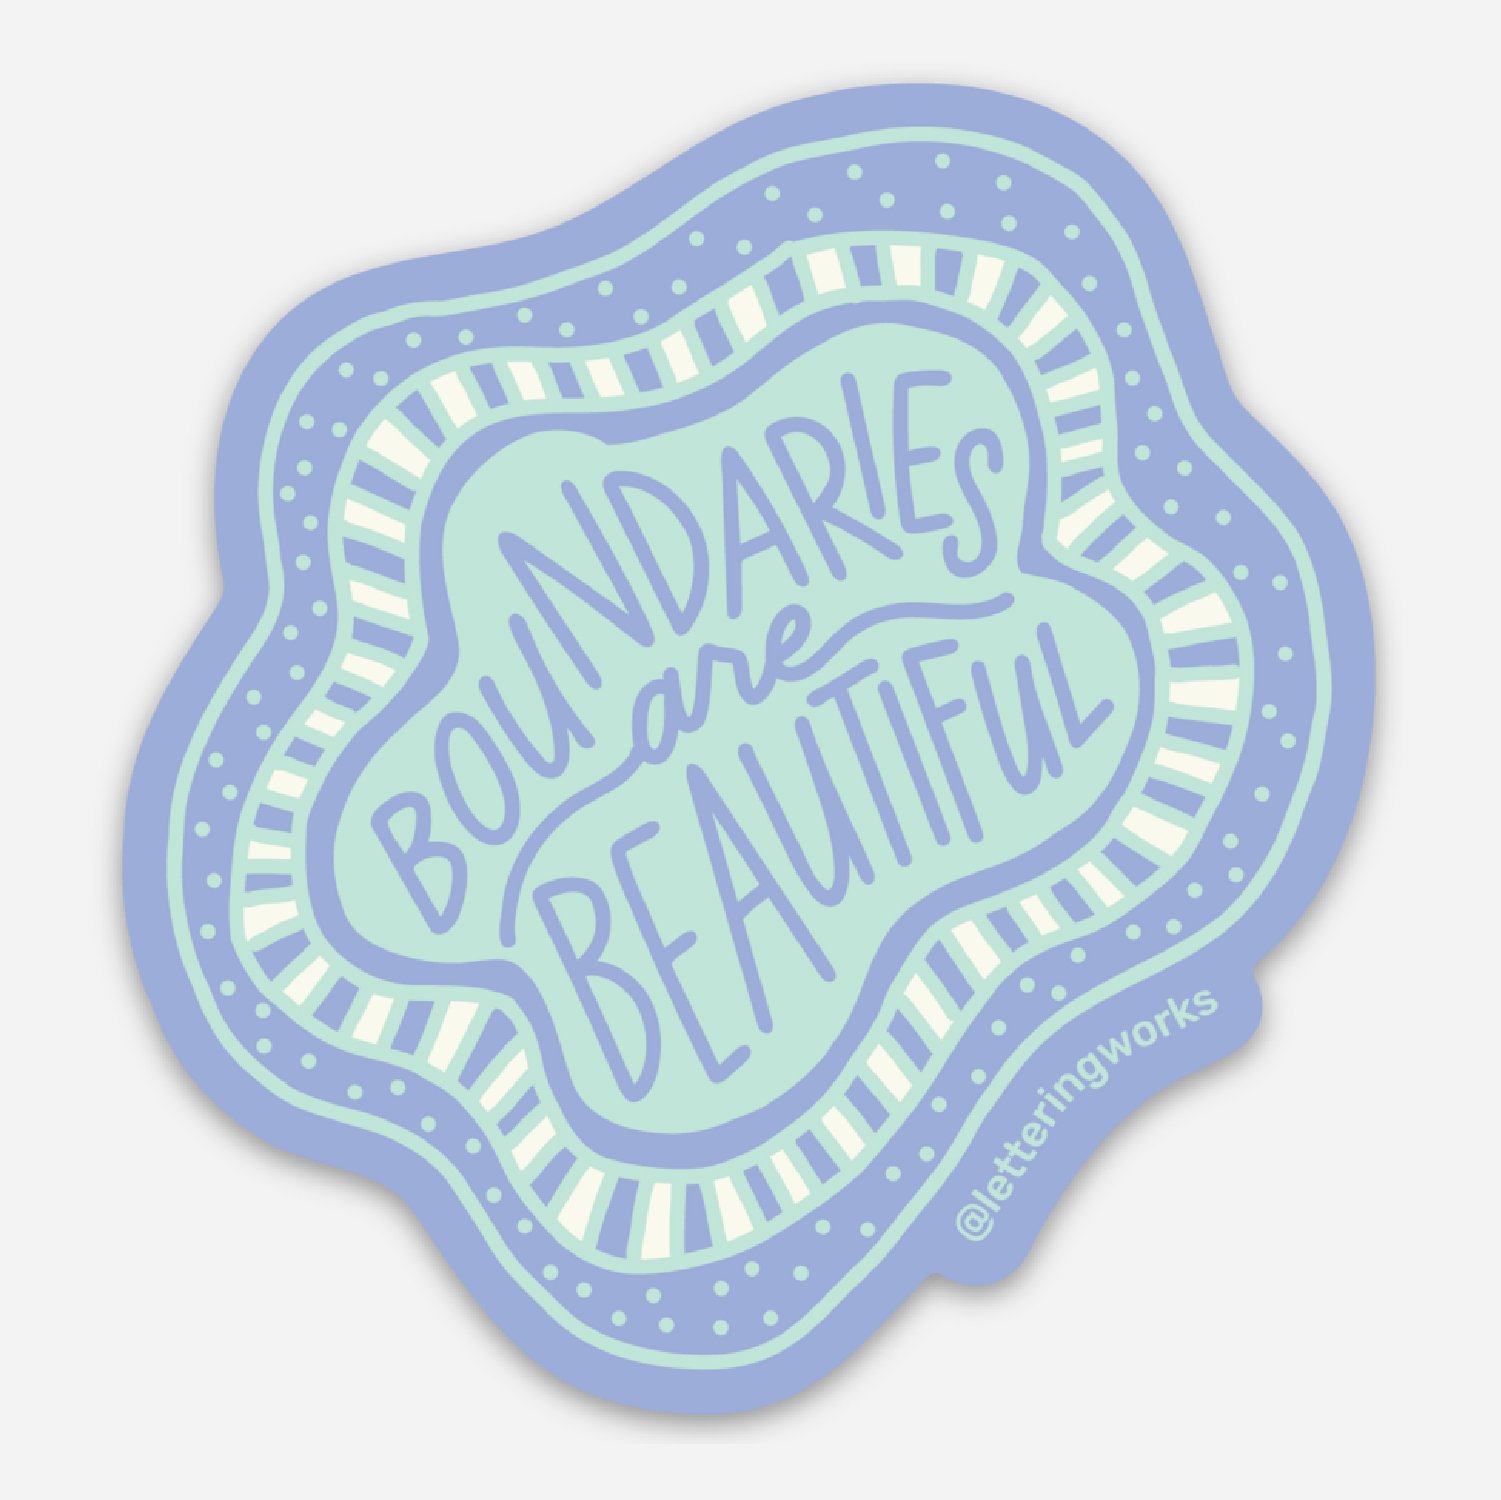 Stickers-Squarespace-Witchy-48.jpg